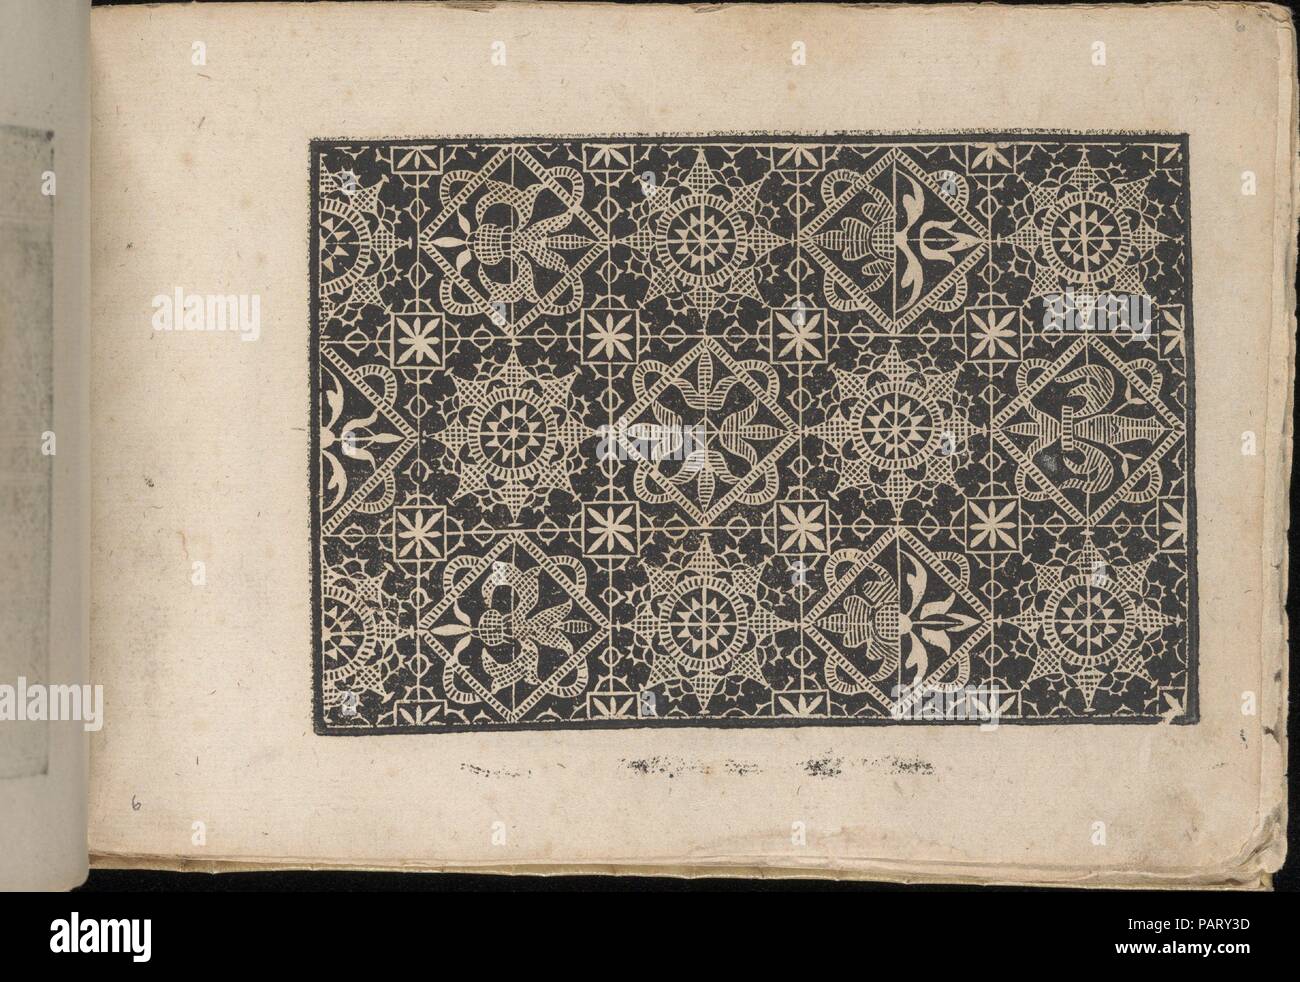 Fiori di Ricami Nuovamente Posti in Luce, page 6 (recto). Designer: Matteo Florimi (Italian, active Siena, ca. 1581-died 1613). Dimensions: Overall: 5 1/2 x 7 7/8 in. (14 x 20 cm). Published in: Venice. Publisher: Francesco de' Franceschi (Italian, active 16th century) , Venice. Date: 1591.  Designed by Matteo Florimi, Italian, active Siena, ca. 1581-died 1613, published by Francesco de' Franceschi, Italian, active 16th century, Venice.  From top to bottom, and left to right:  Design decorated with squares ornamented with an alternating pattern of circles with flowers at the center and diamond Stock Photo